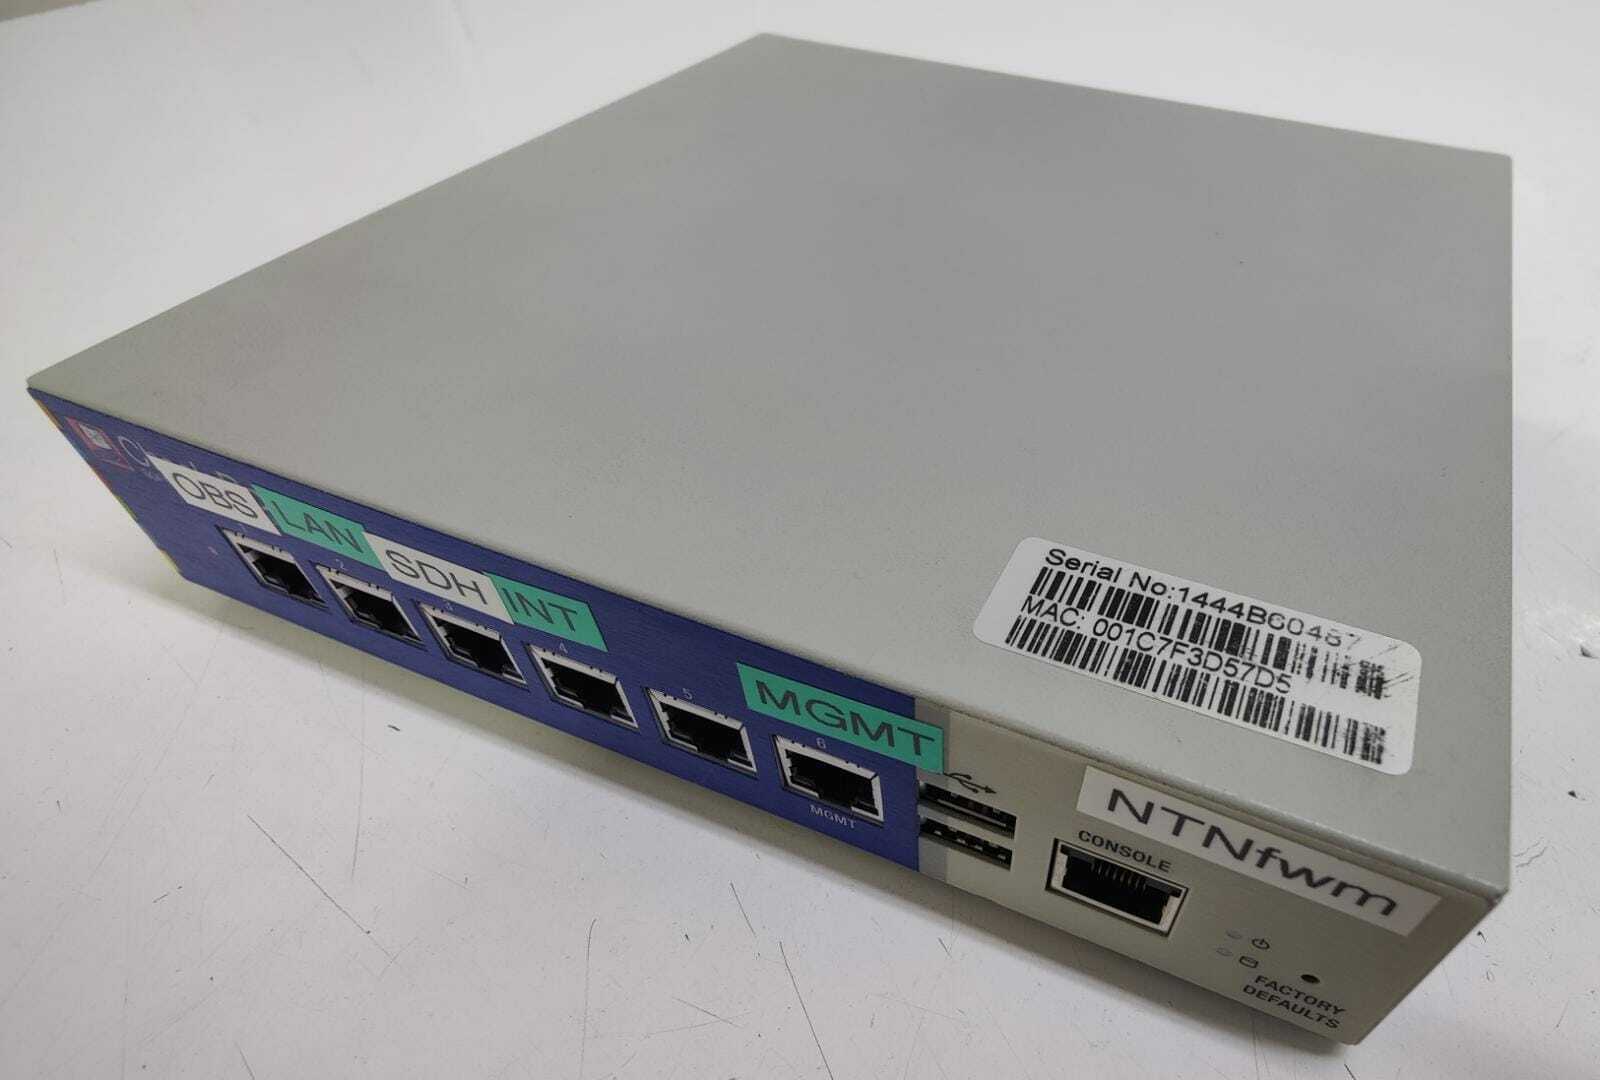 Check Point T-110 6-Port Gigabit Security Appliance Firewall